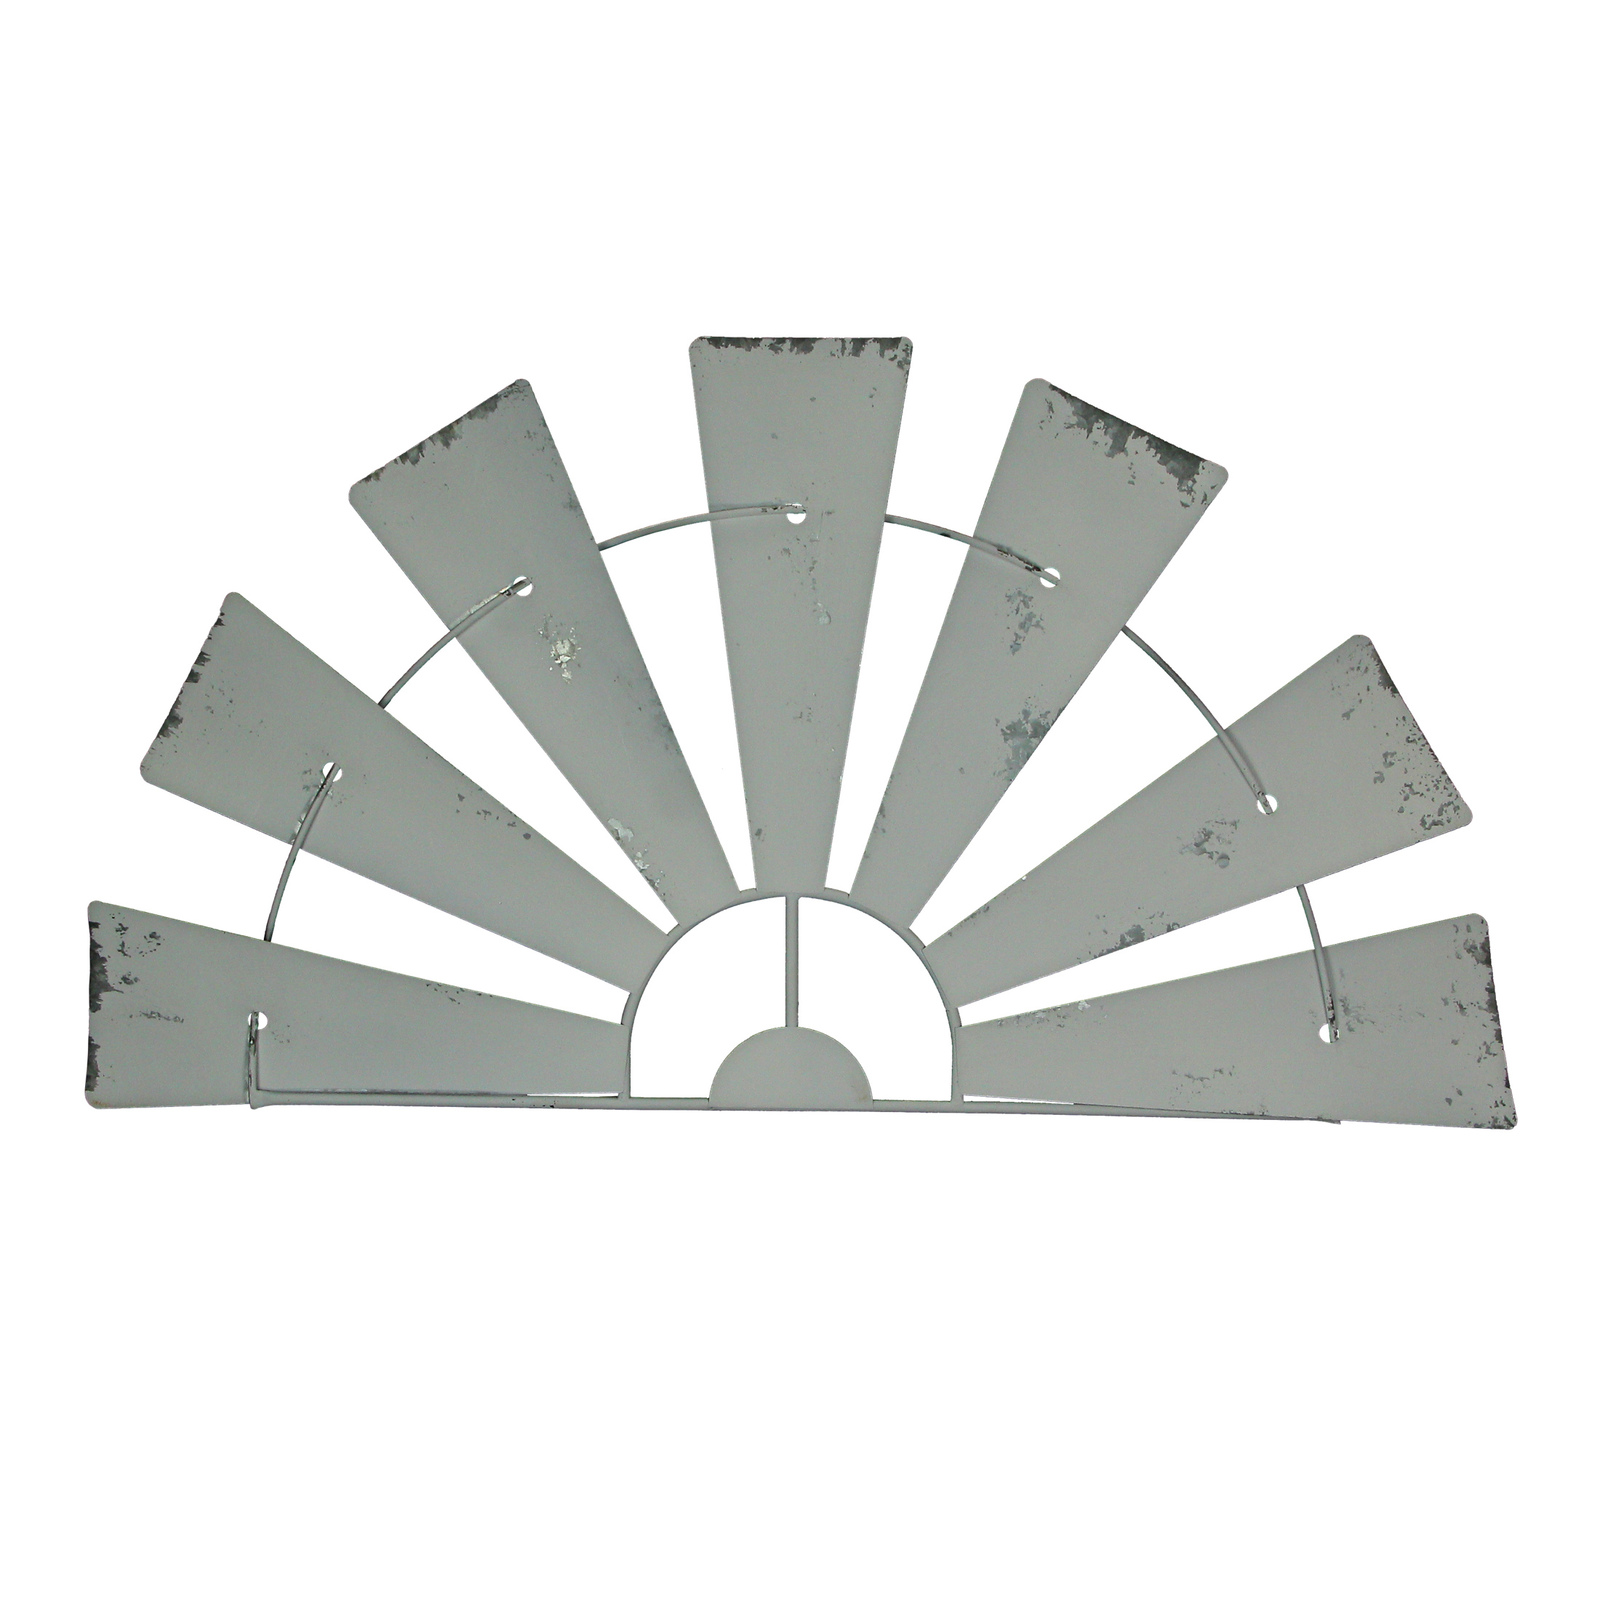 35 Inch Weathered White Finish Metal Half-Windmill Wall Sculpture Décor Art - $32.85